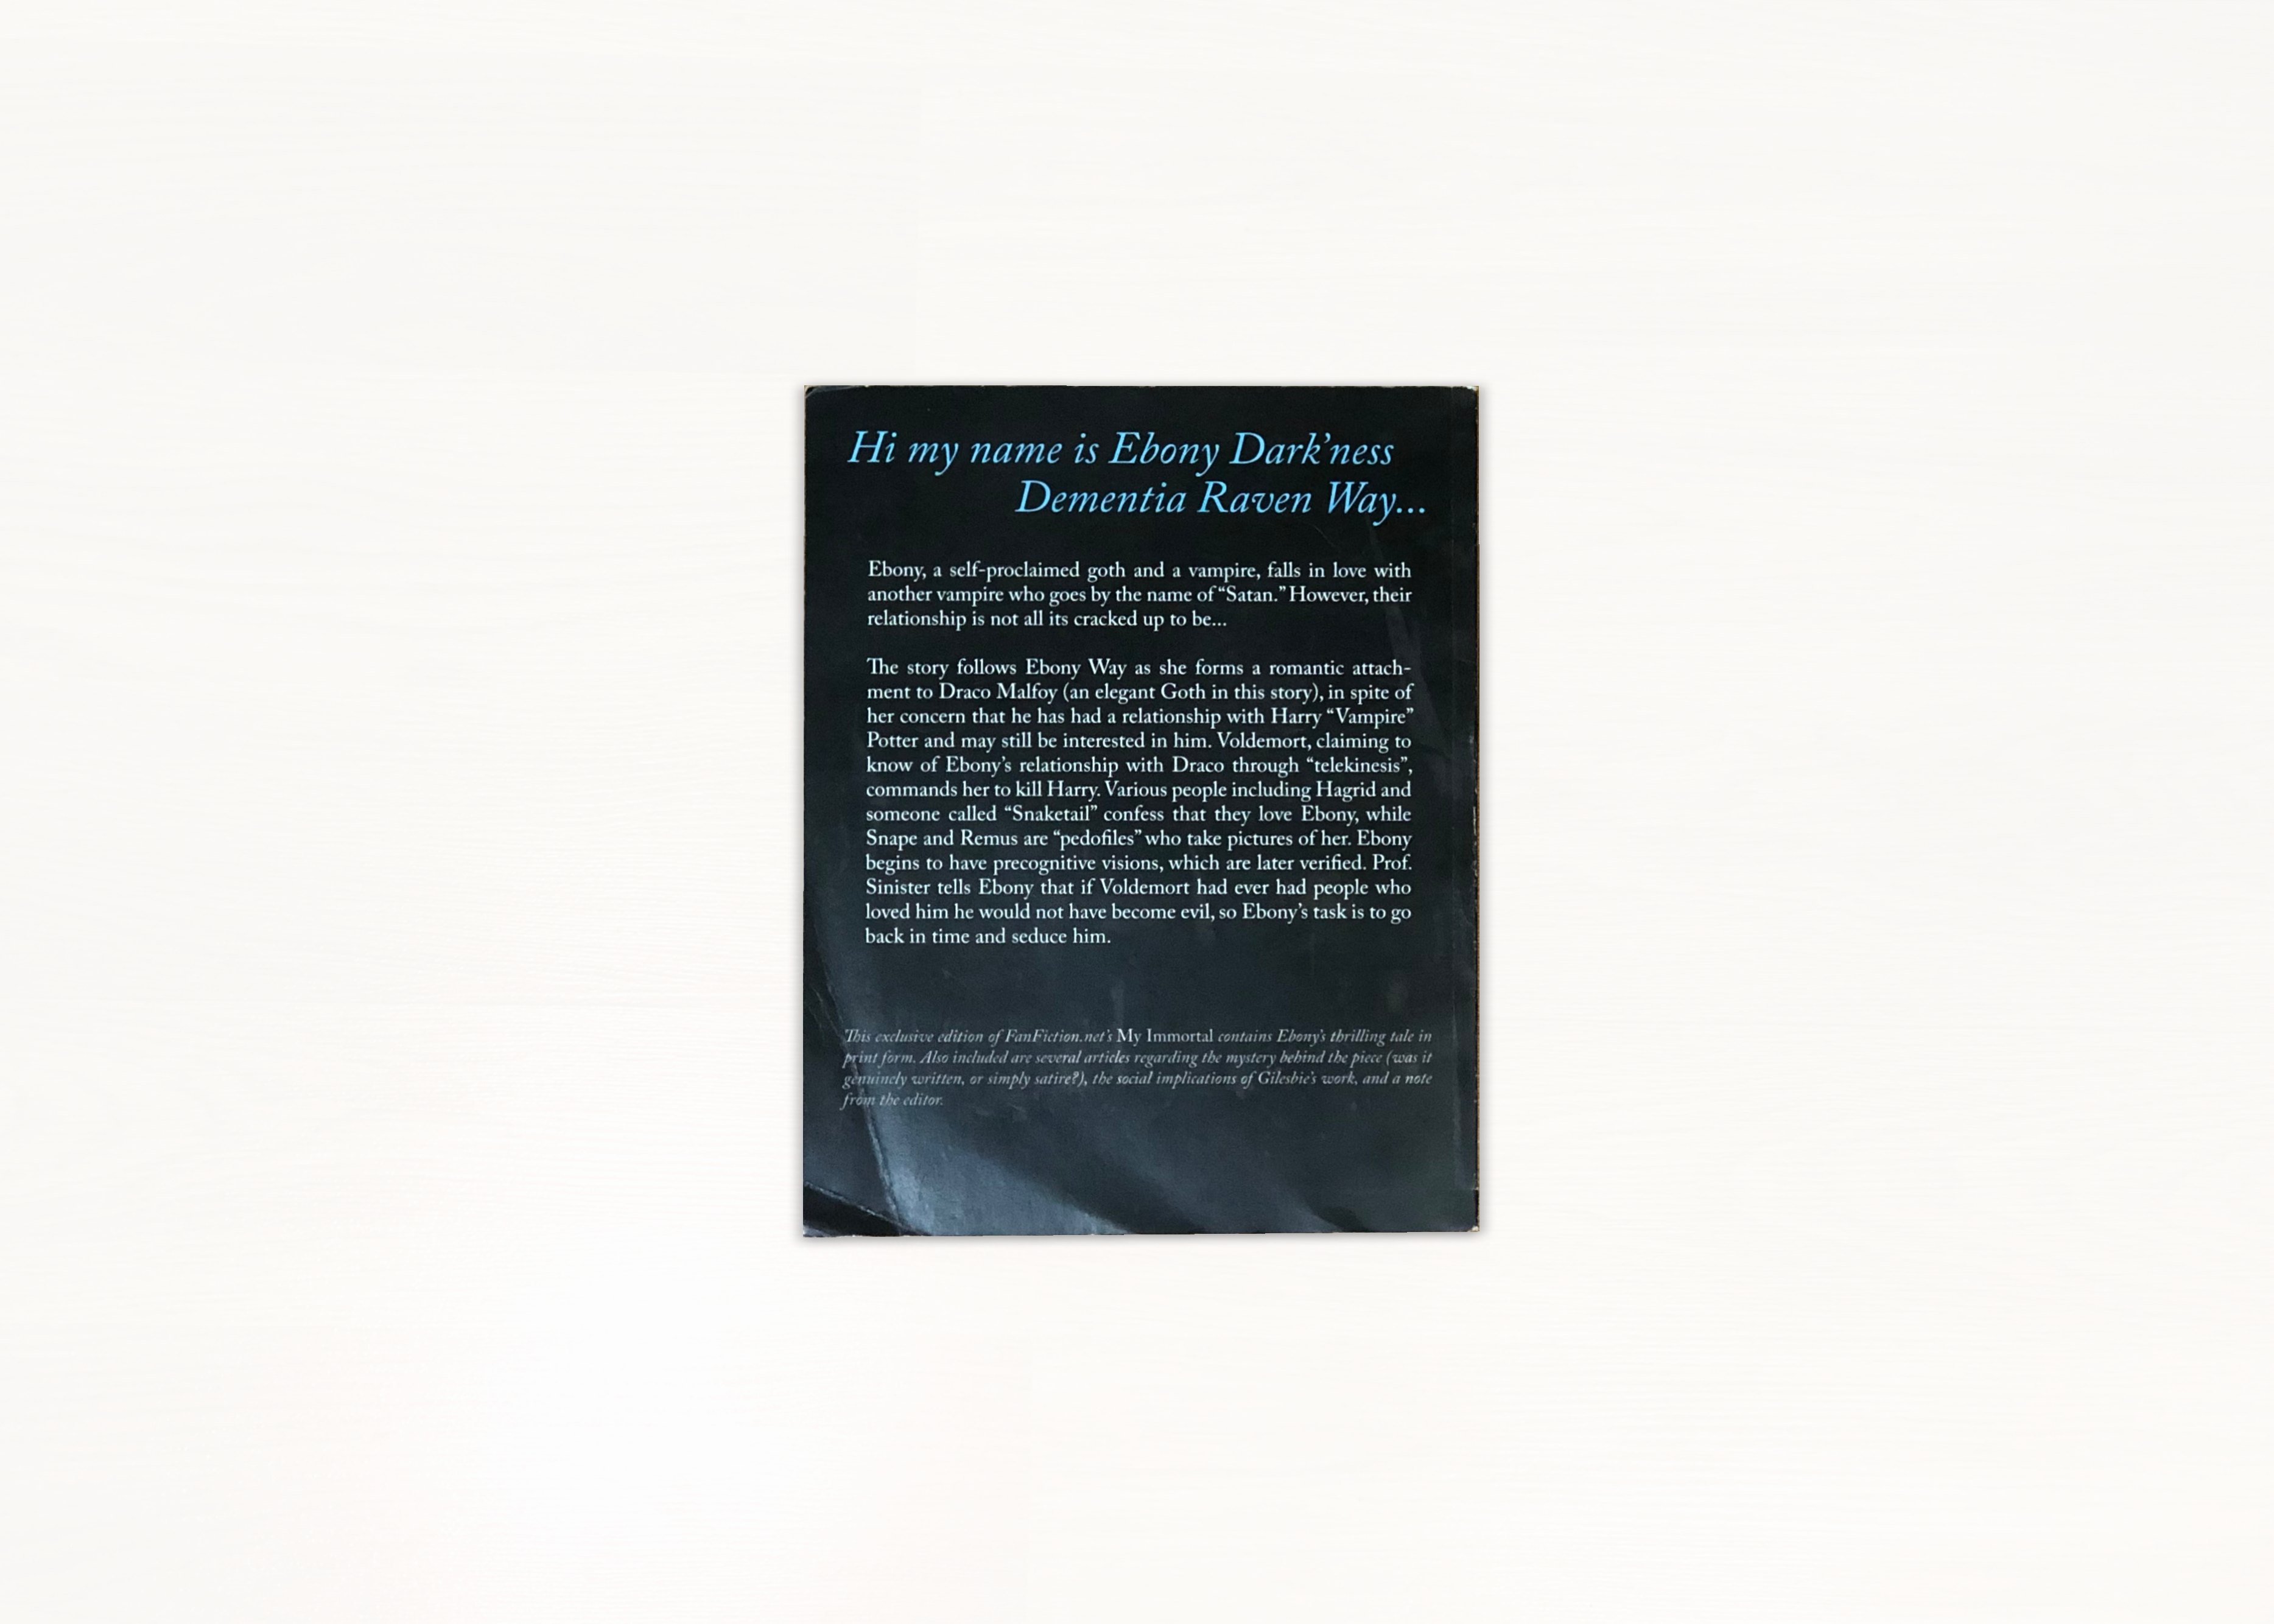 A printed version of the book's back cover.